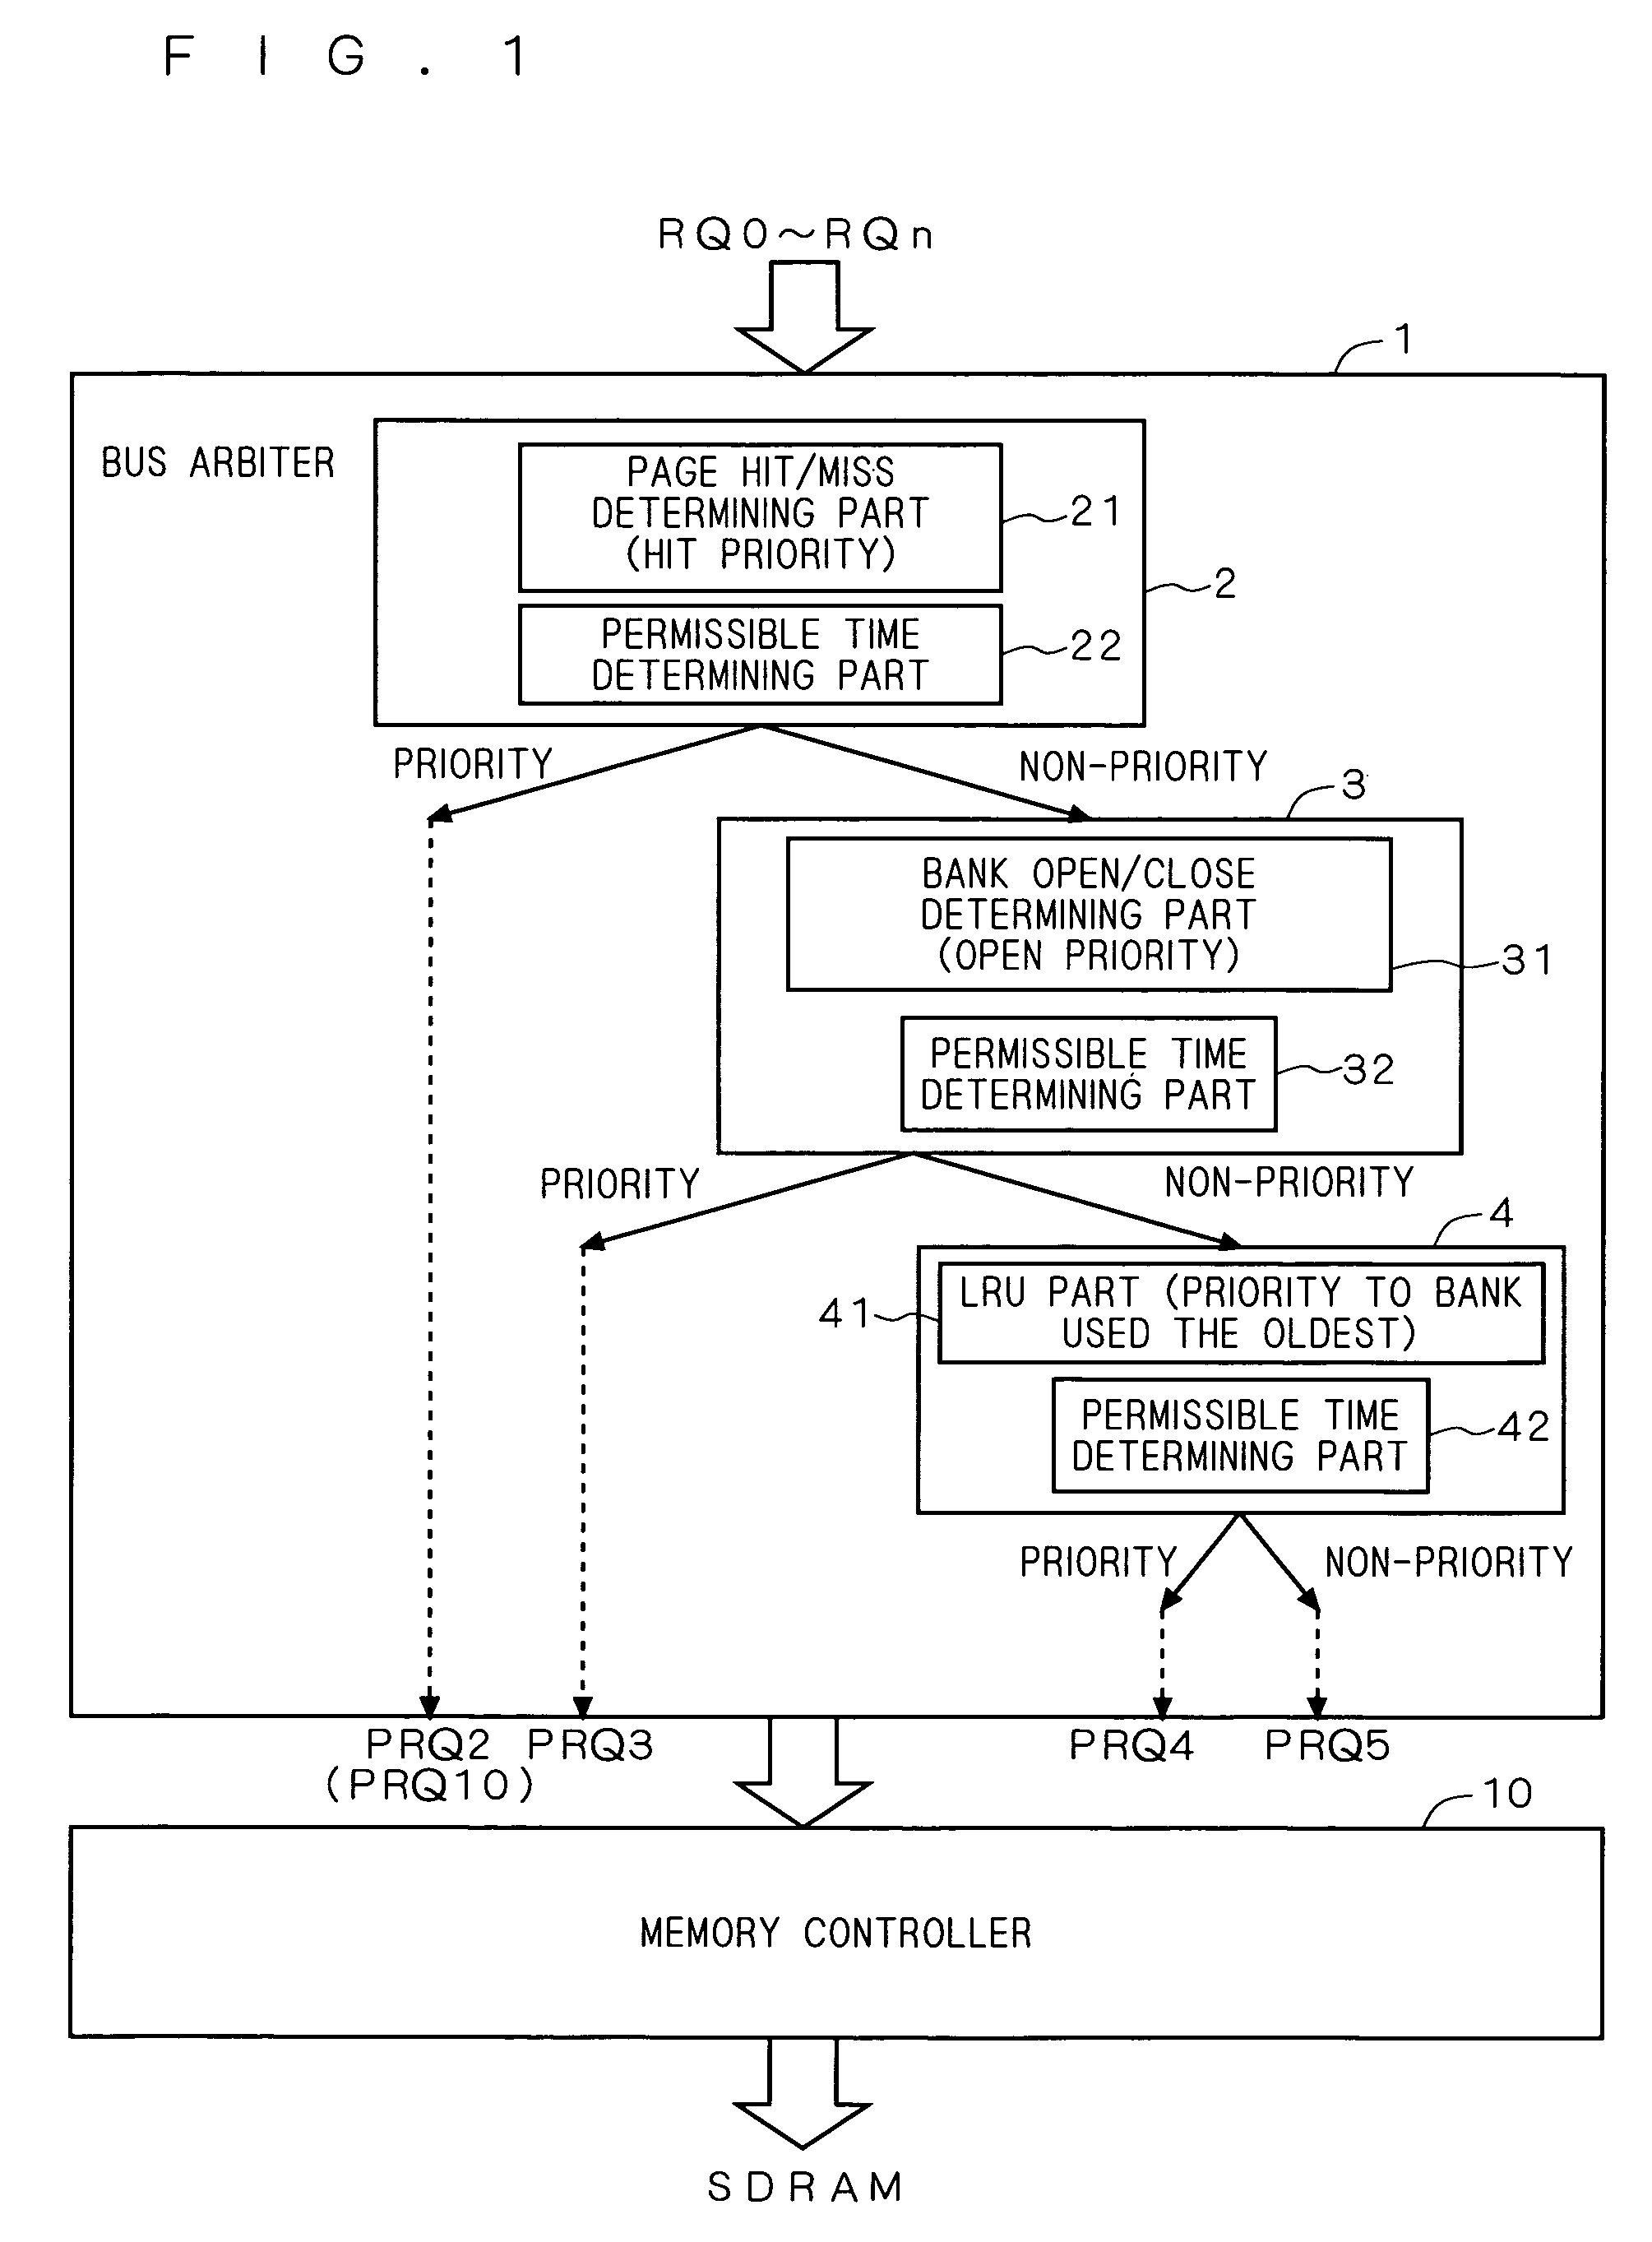 Request arbitration device and memory controller